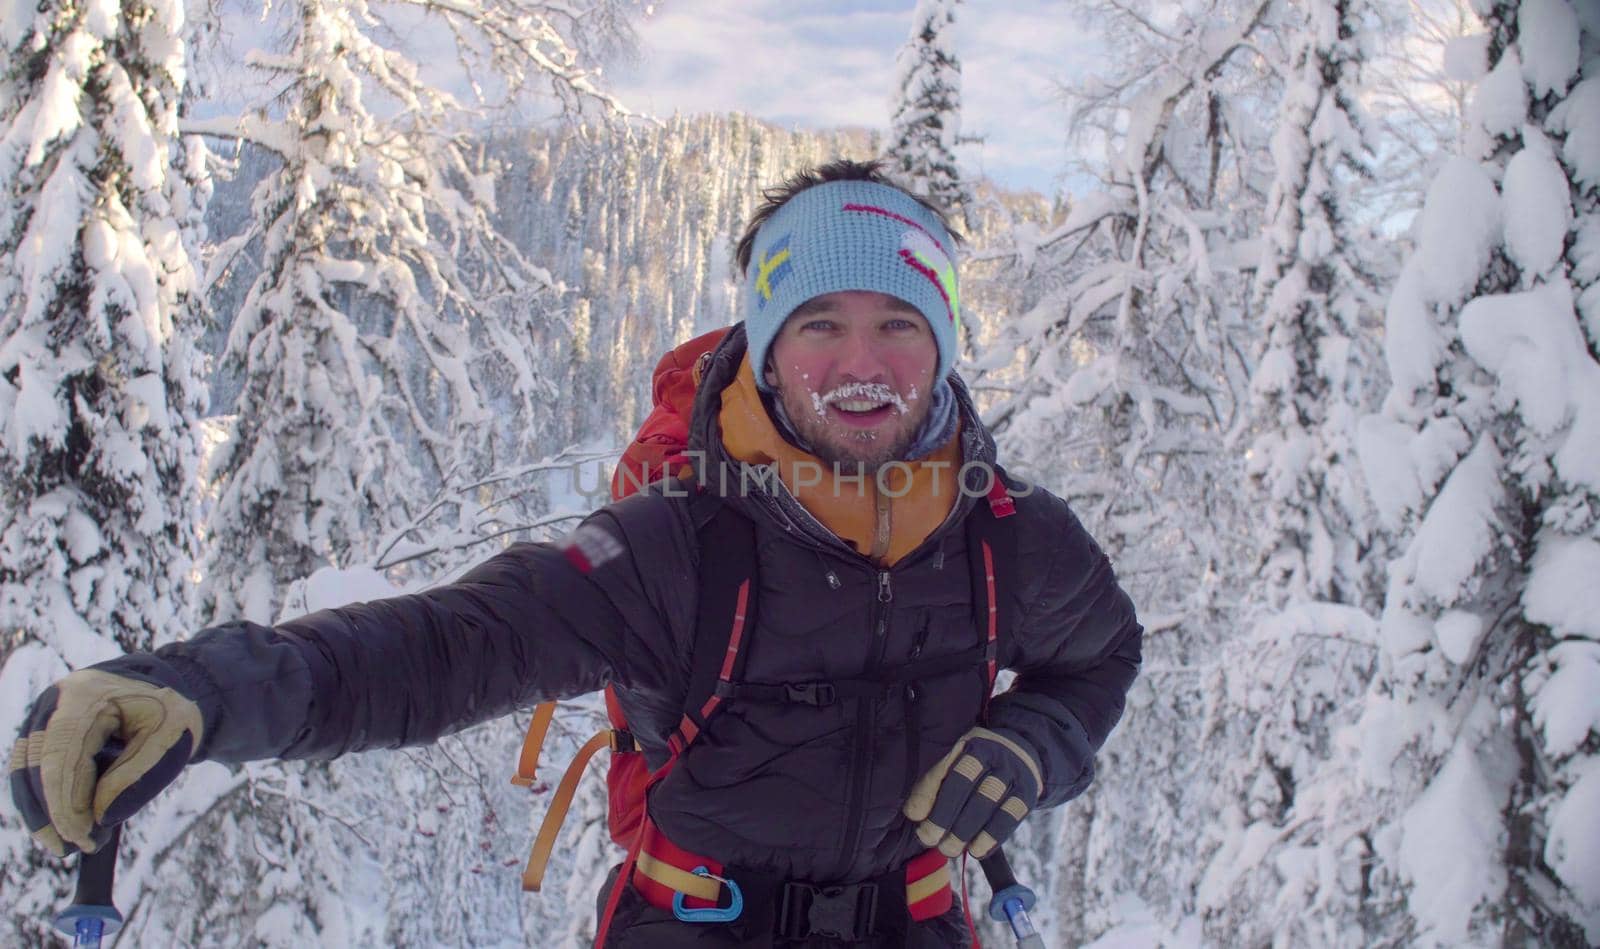 Skitour in Siberia. Portrait of young skier in a snowy forest.